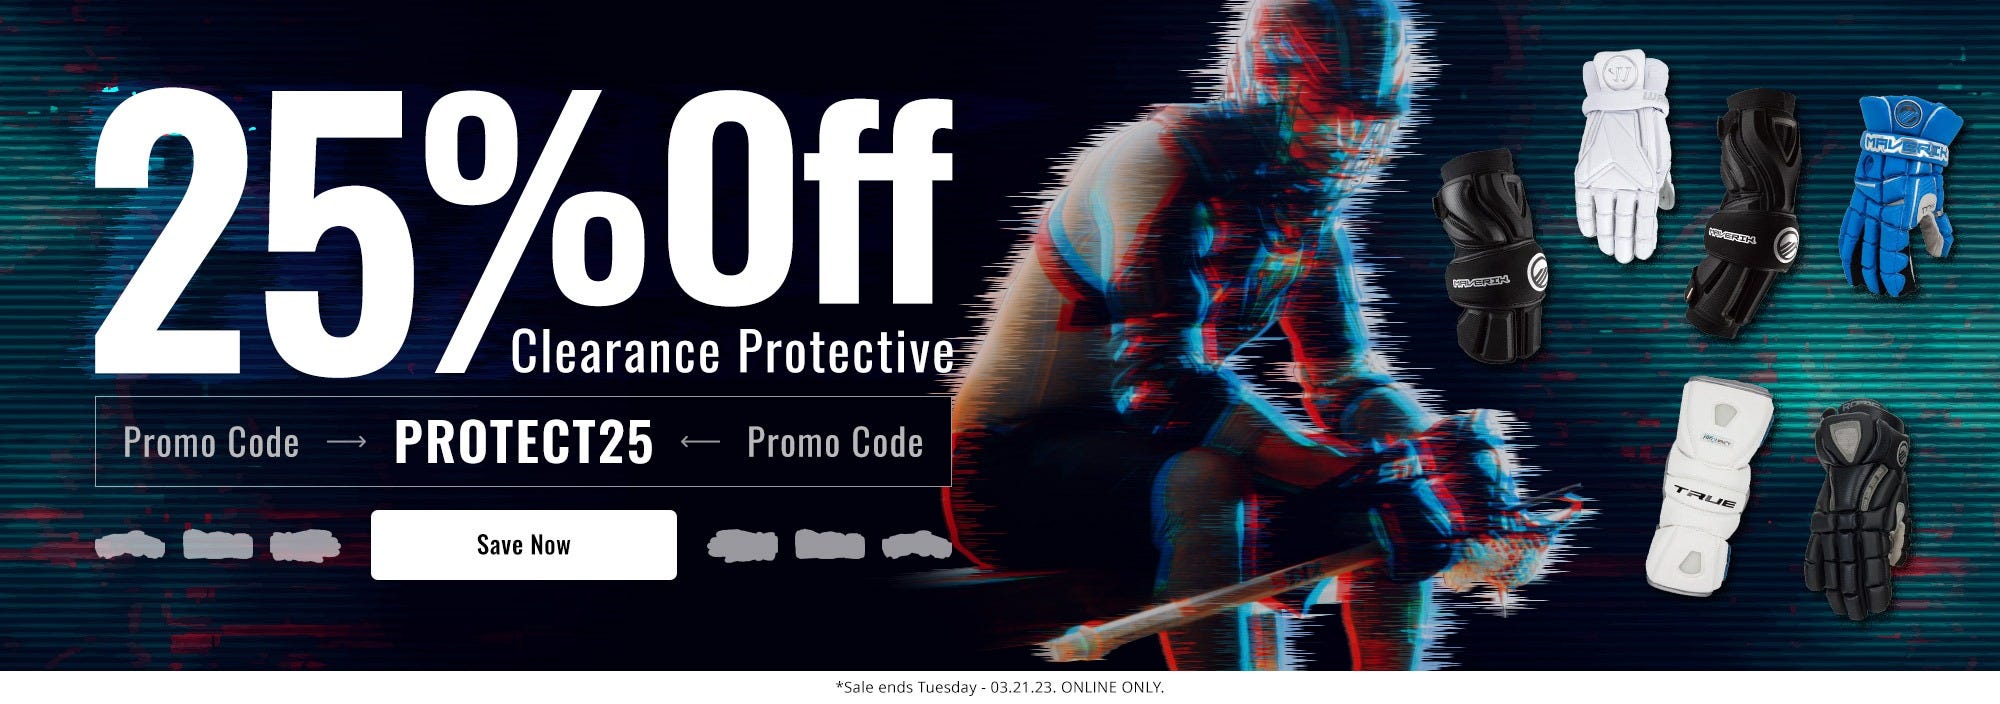 25% off clearance protective